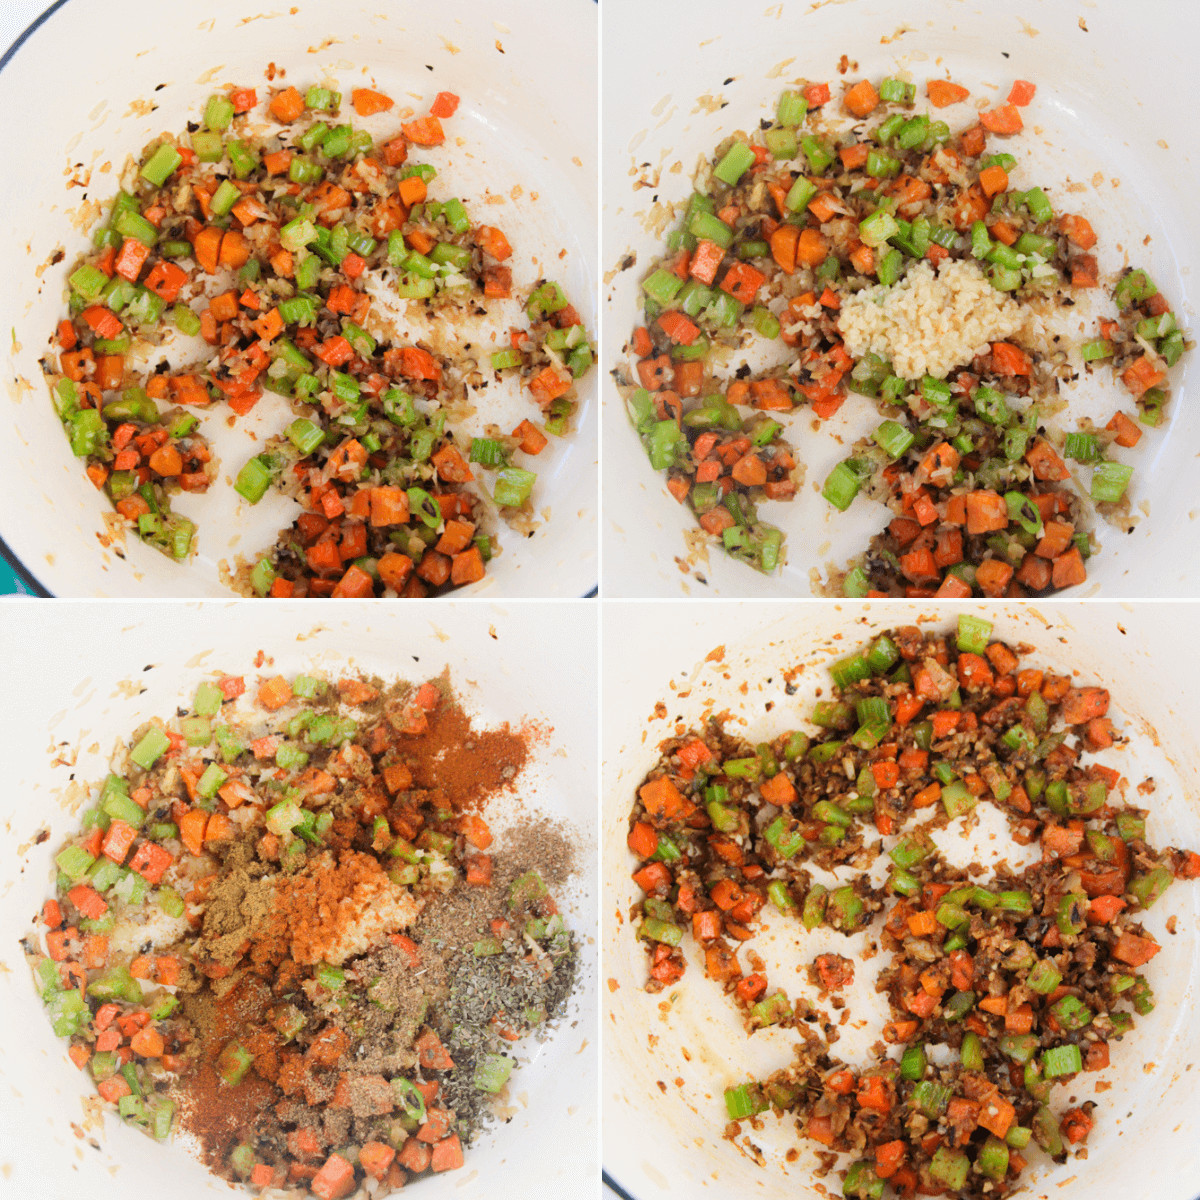 A series of photos showing the process of making Cuban Black Bean Soup.